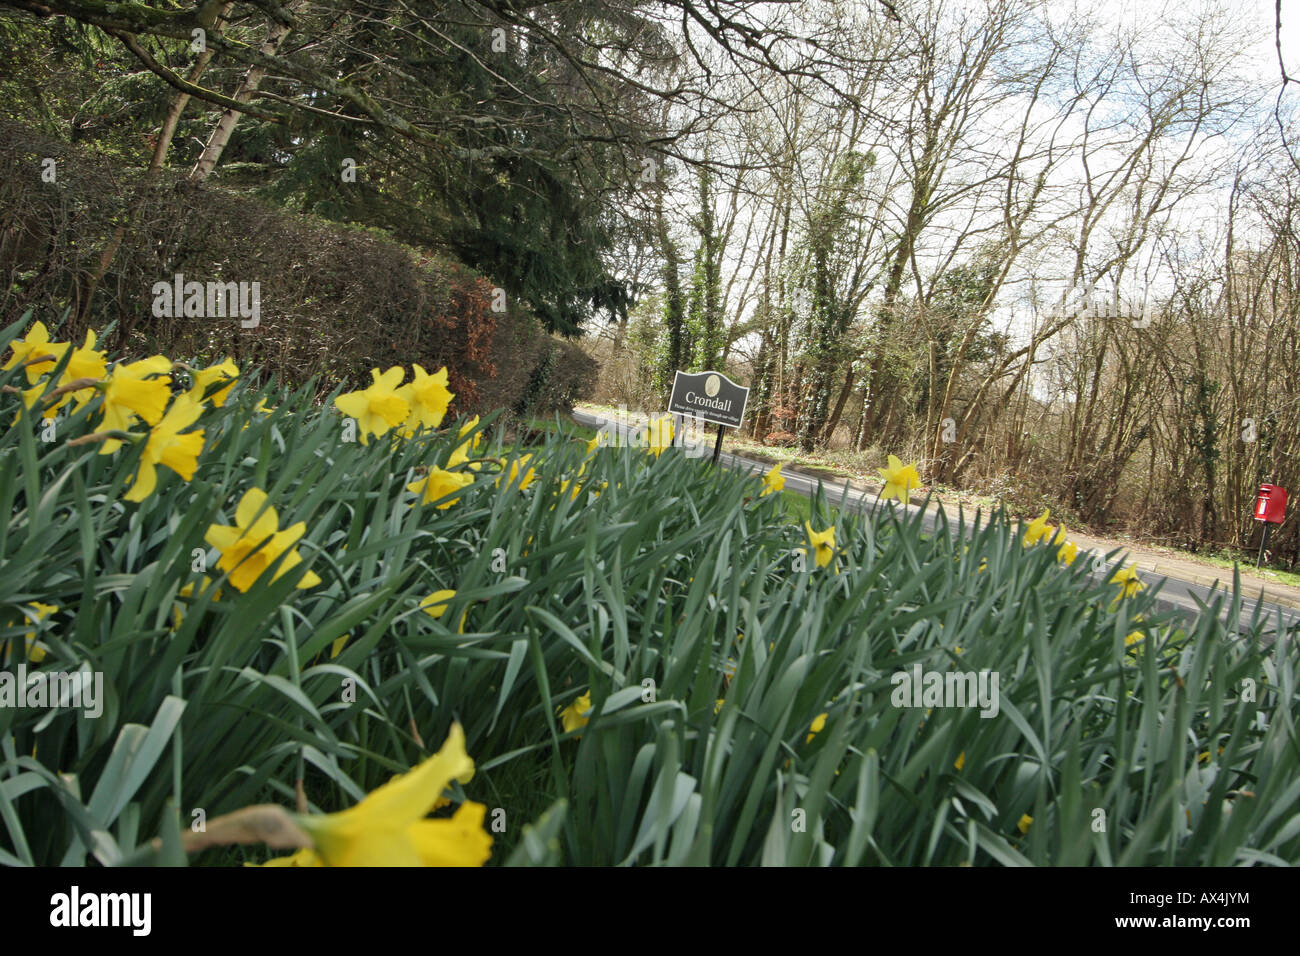 Crondall Village Sign Hampshire With Spring Daffodils Stock Photo